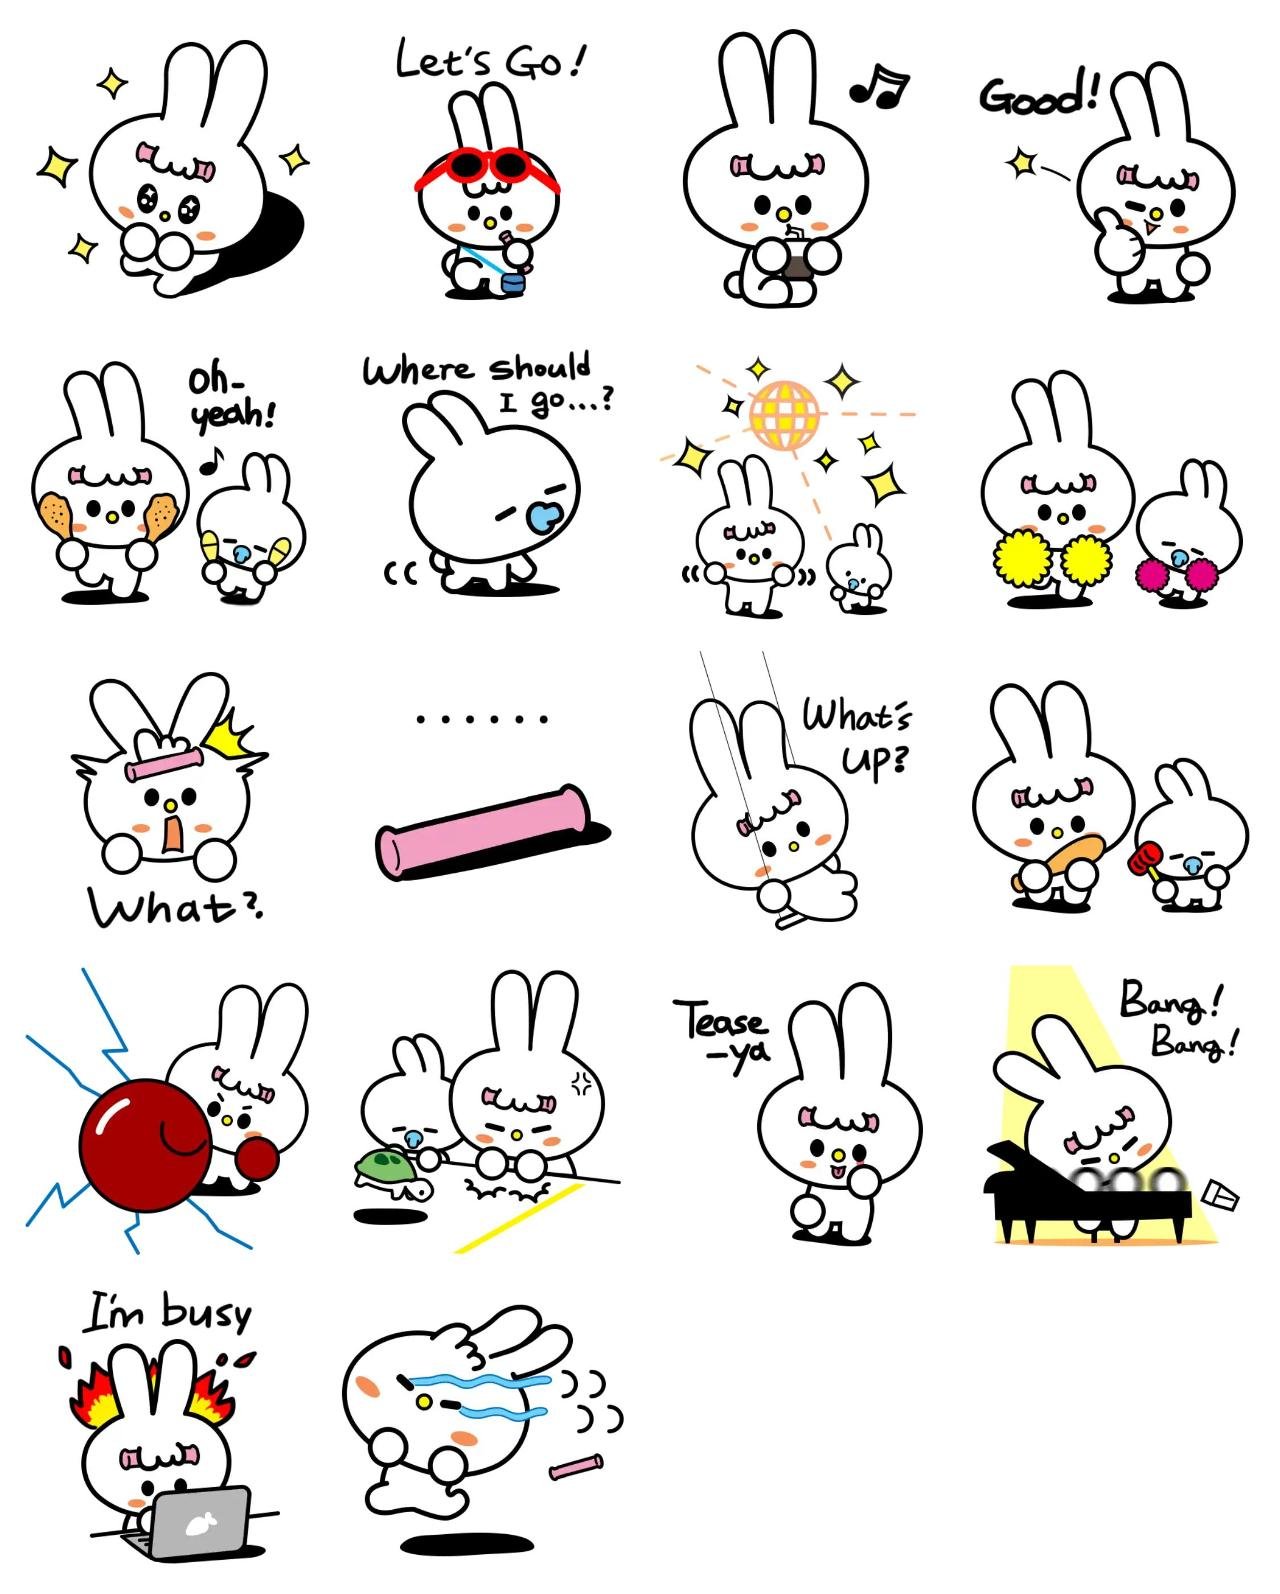 Hair Roll Bunny Animation/Cartoon,Gag sticker pack for Whatsapp, Telegram, Signal, and others chatting and message apps